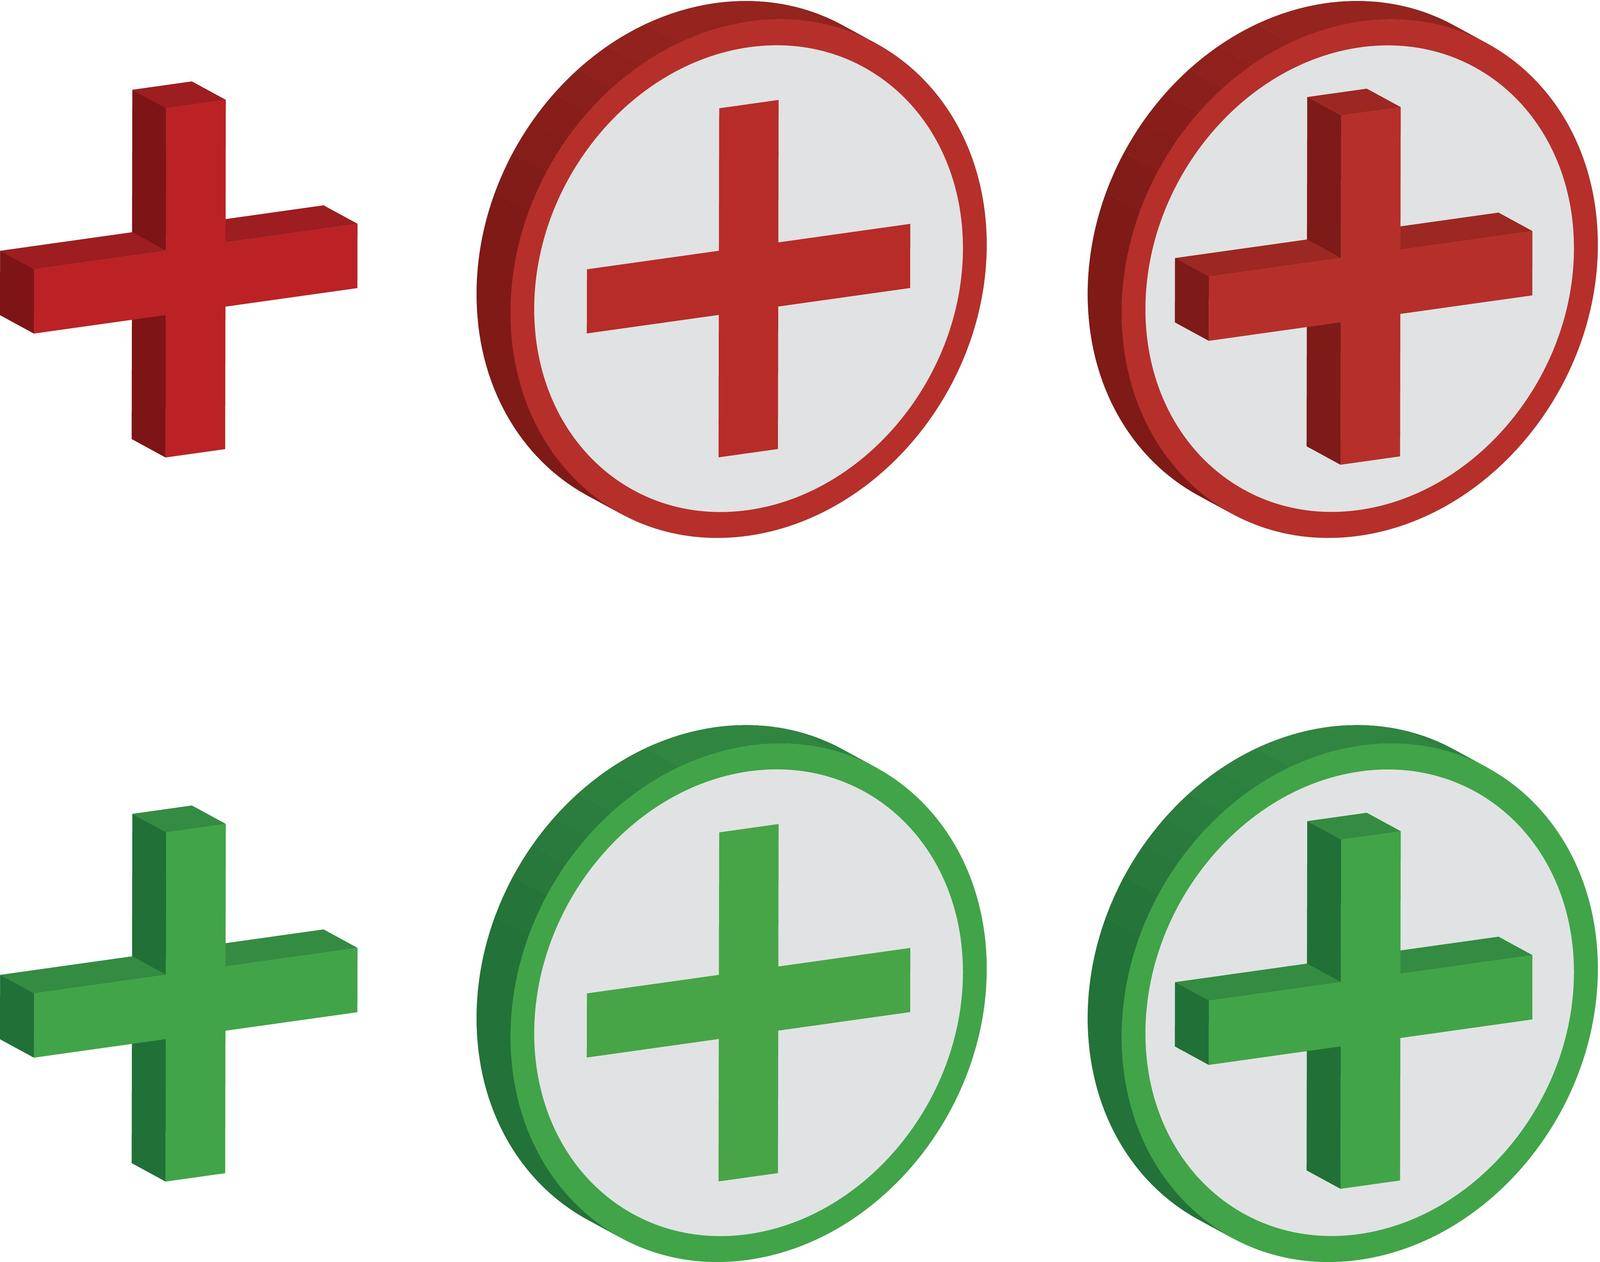 Plus sign set in green and red colors. Three types of signal on white isolated background, three dimensions.